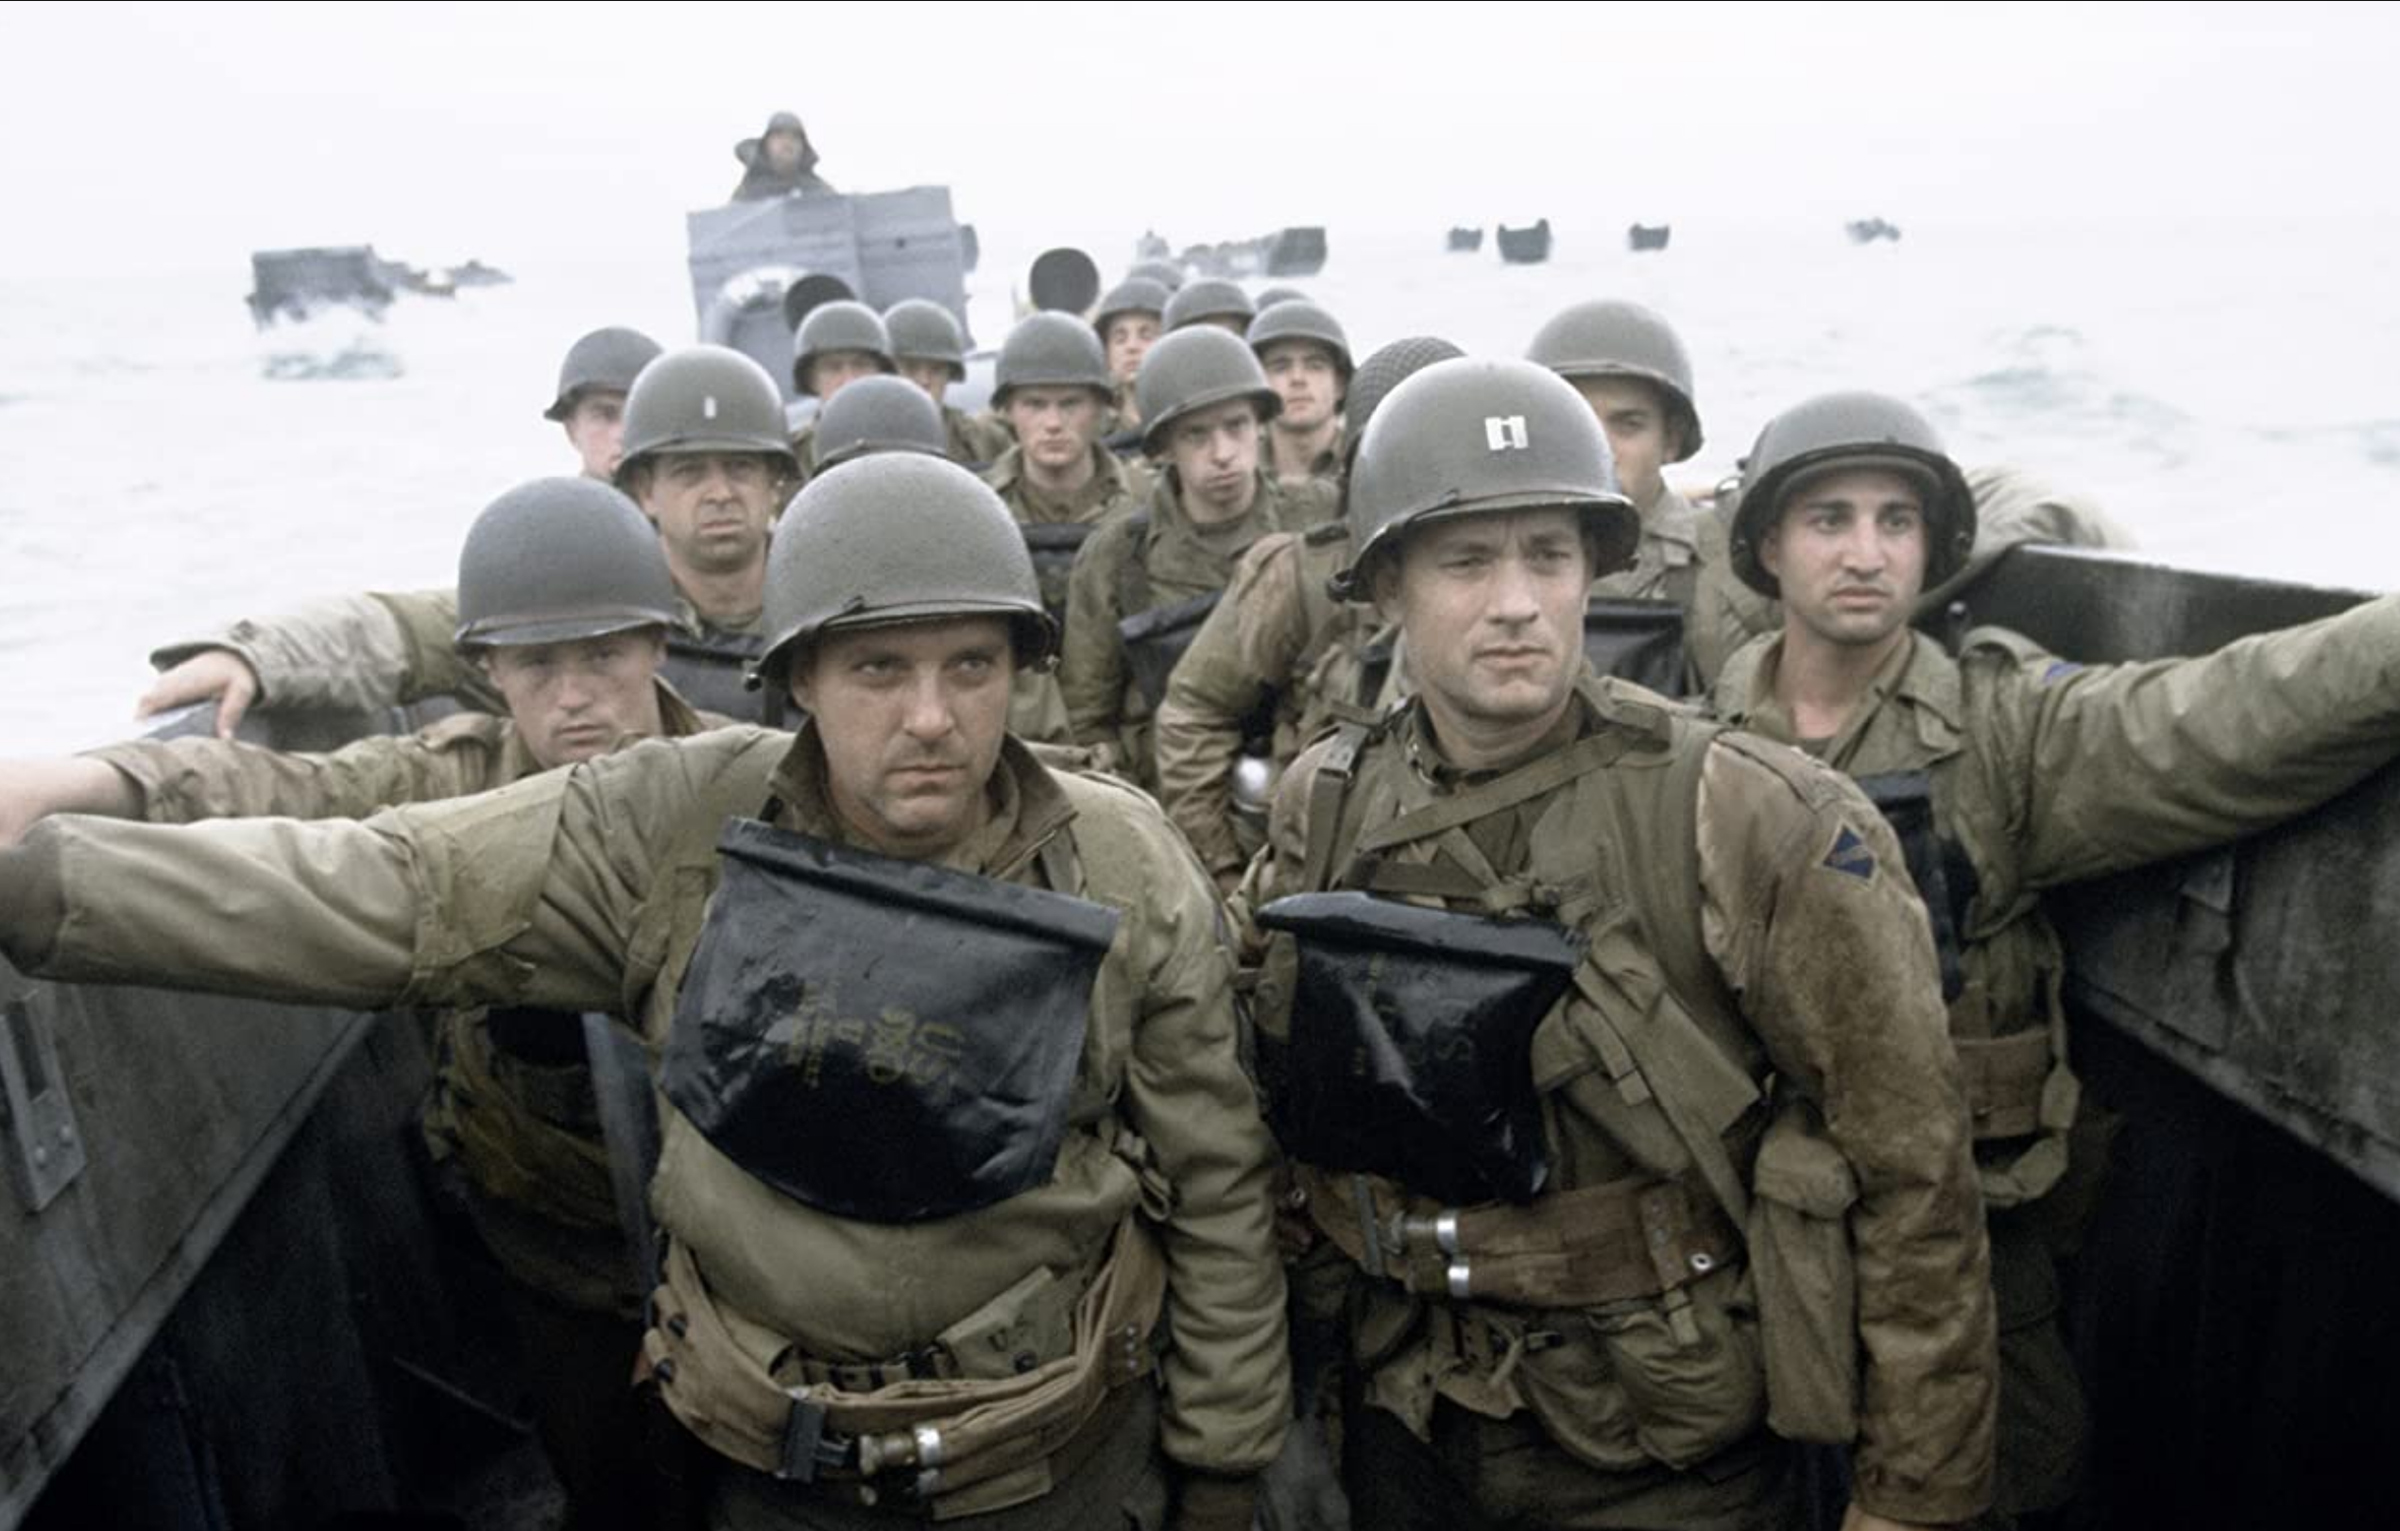 Tom Hanks and Tom Sizemore in “Saving Private Ryan” (1998)